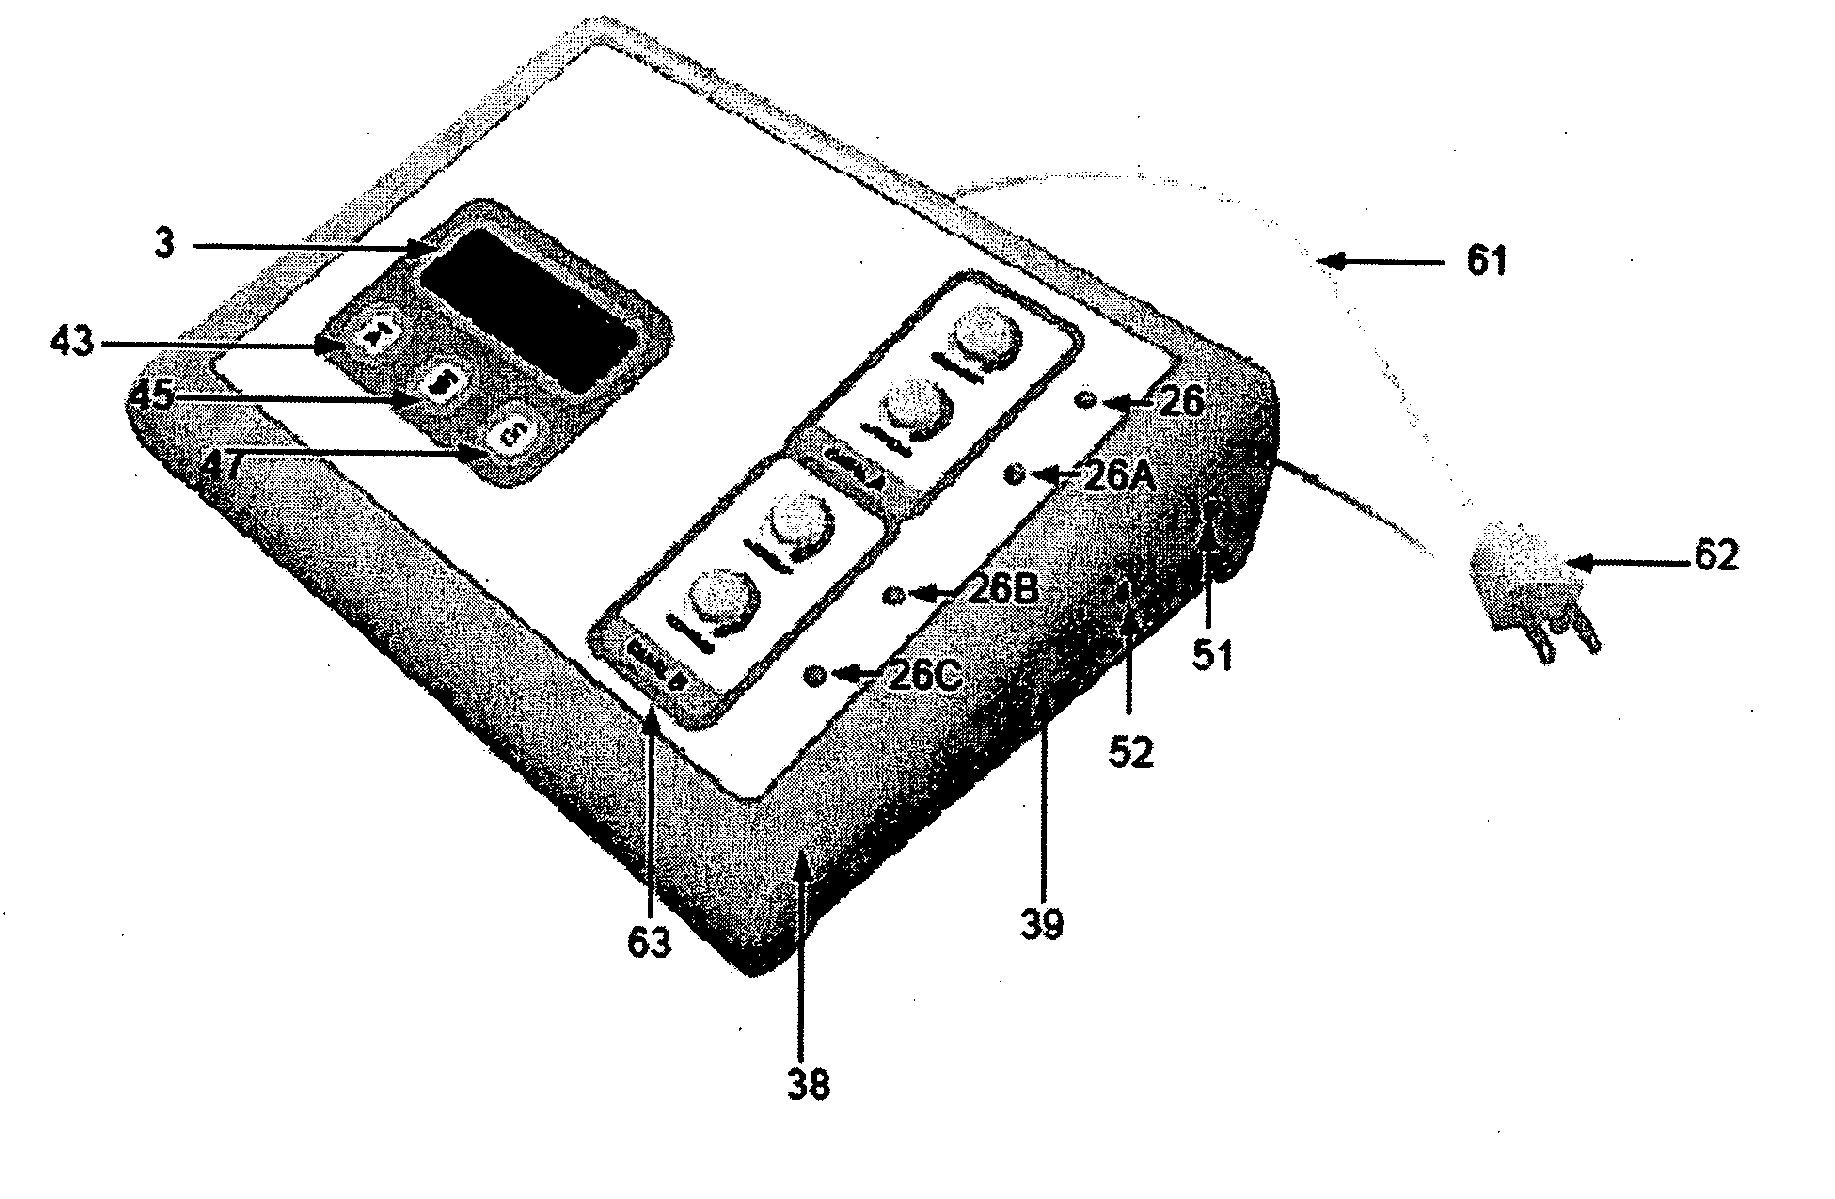 Low frequency electrical stimulator device for the prevention and treatment of chronic wounds